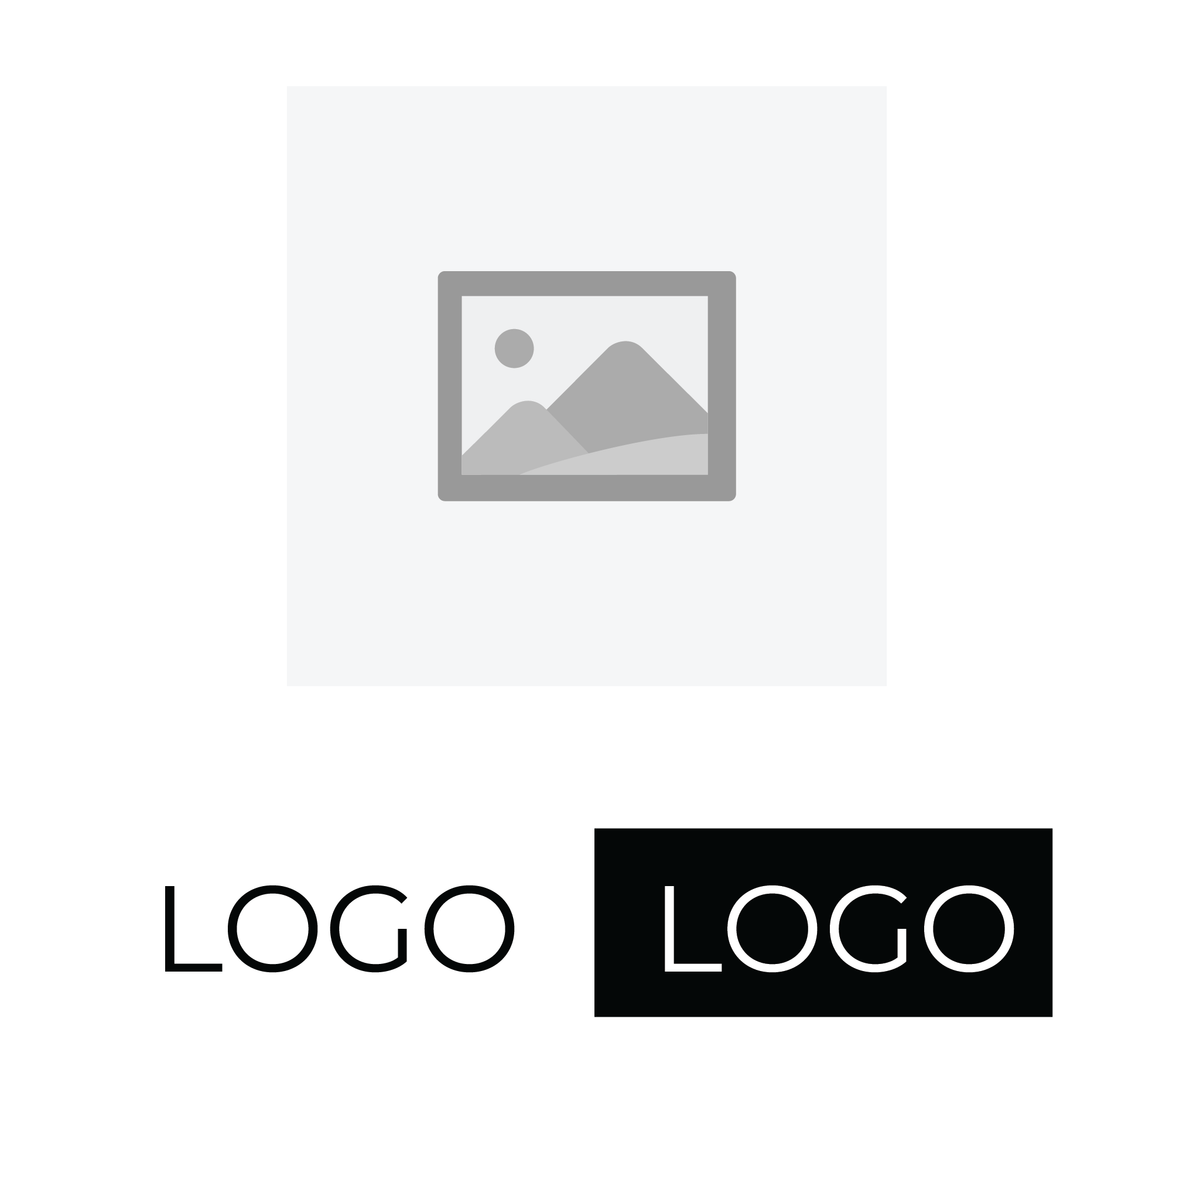 Placeholder image for generic image and logos.